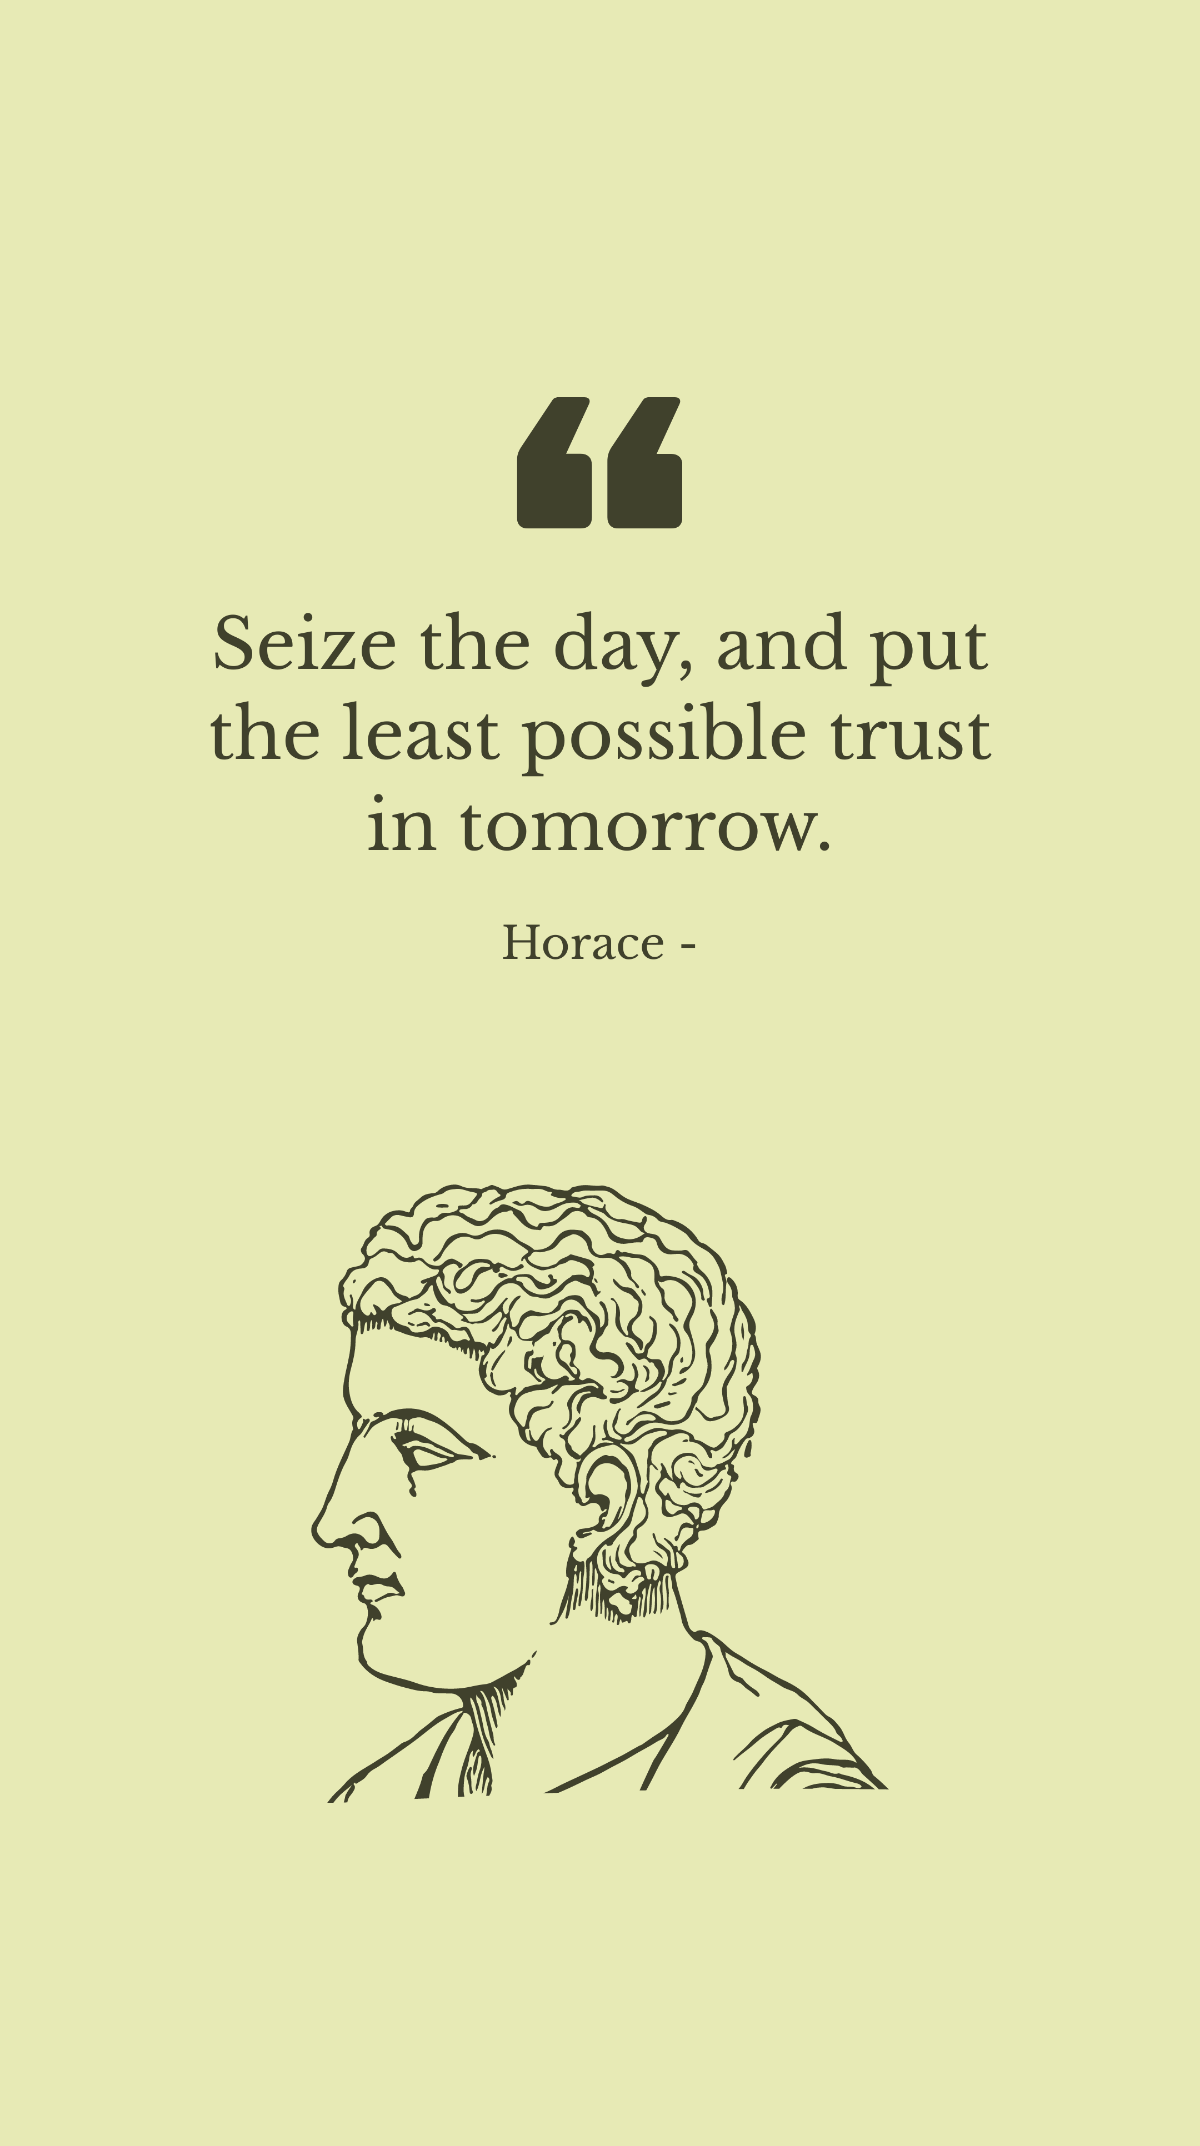 Horace - Seize the day, and put the least possible trust in tomorrow.